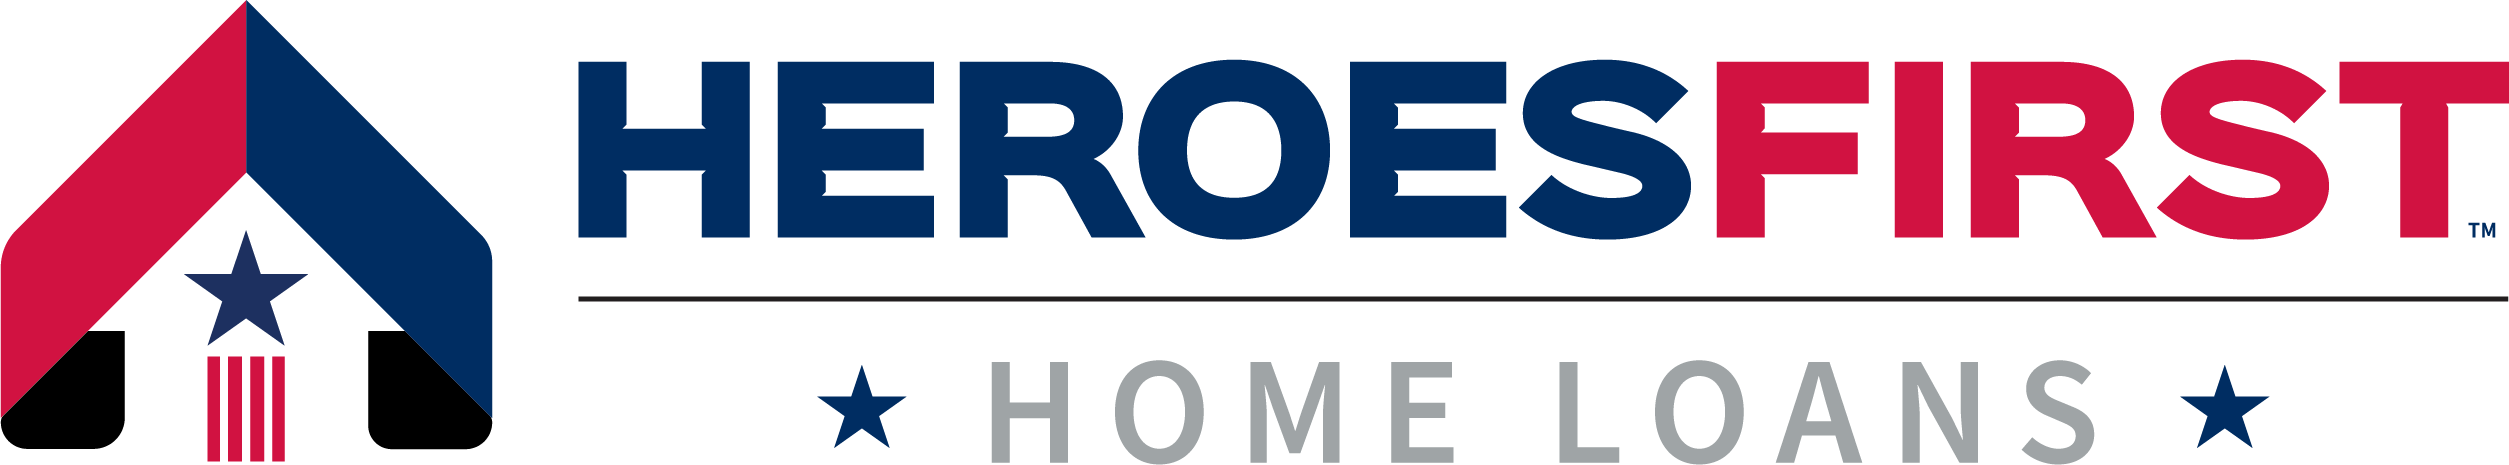 Heroes First Blue Red Logo